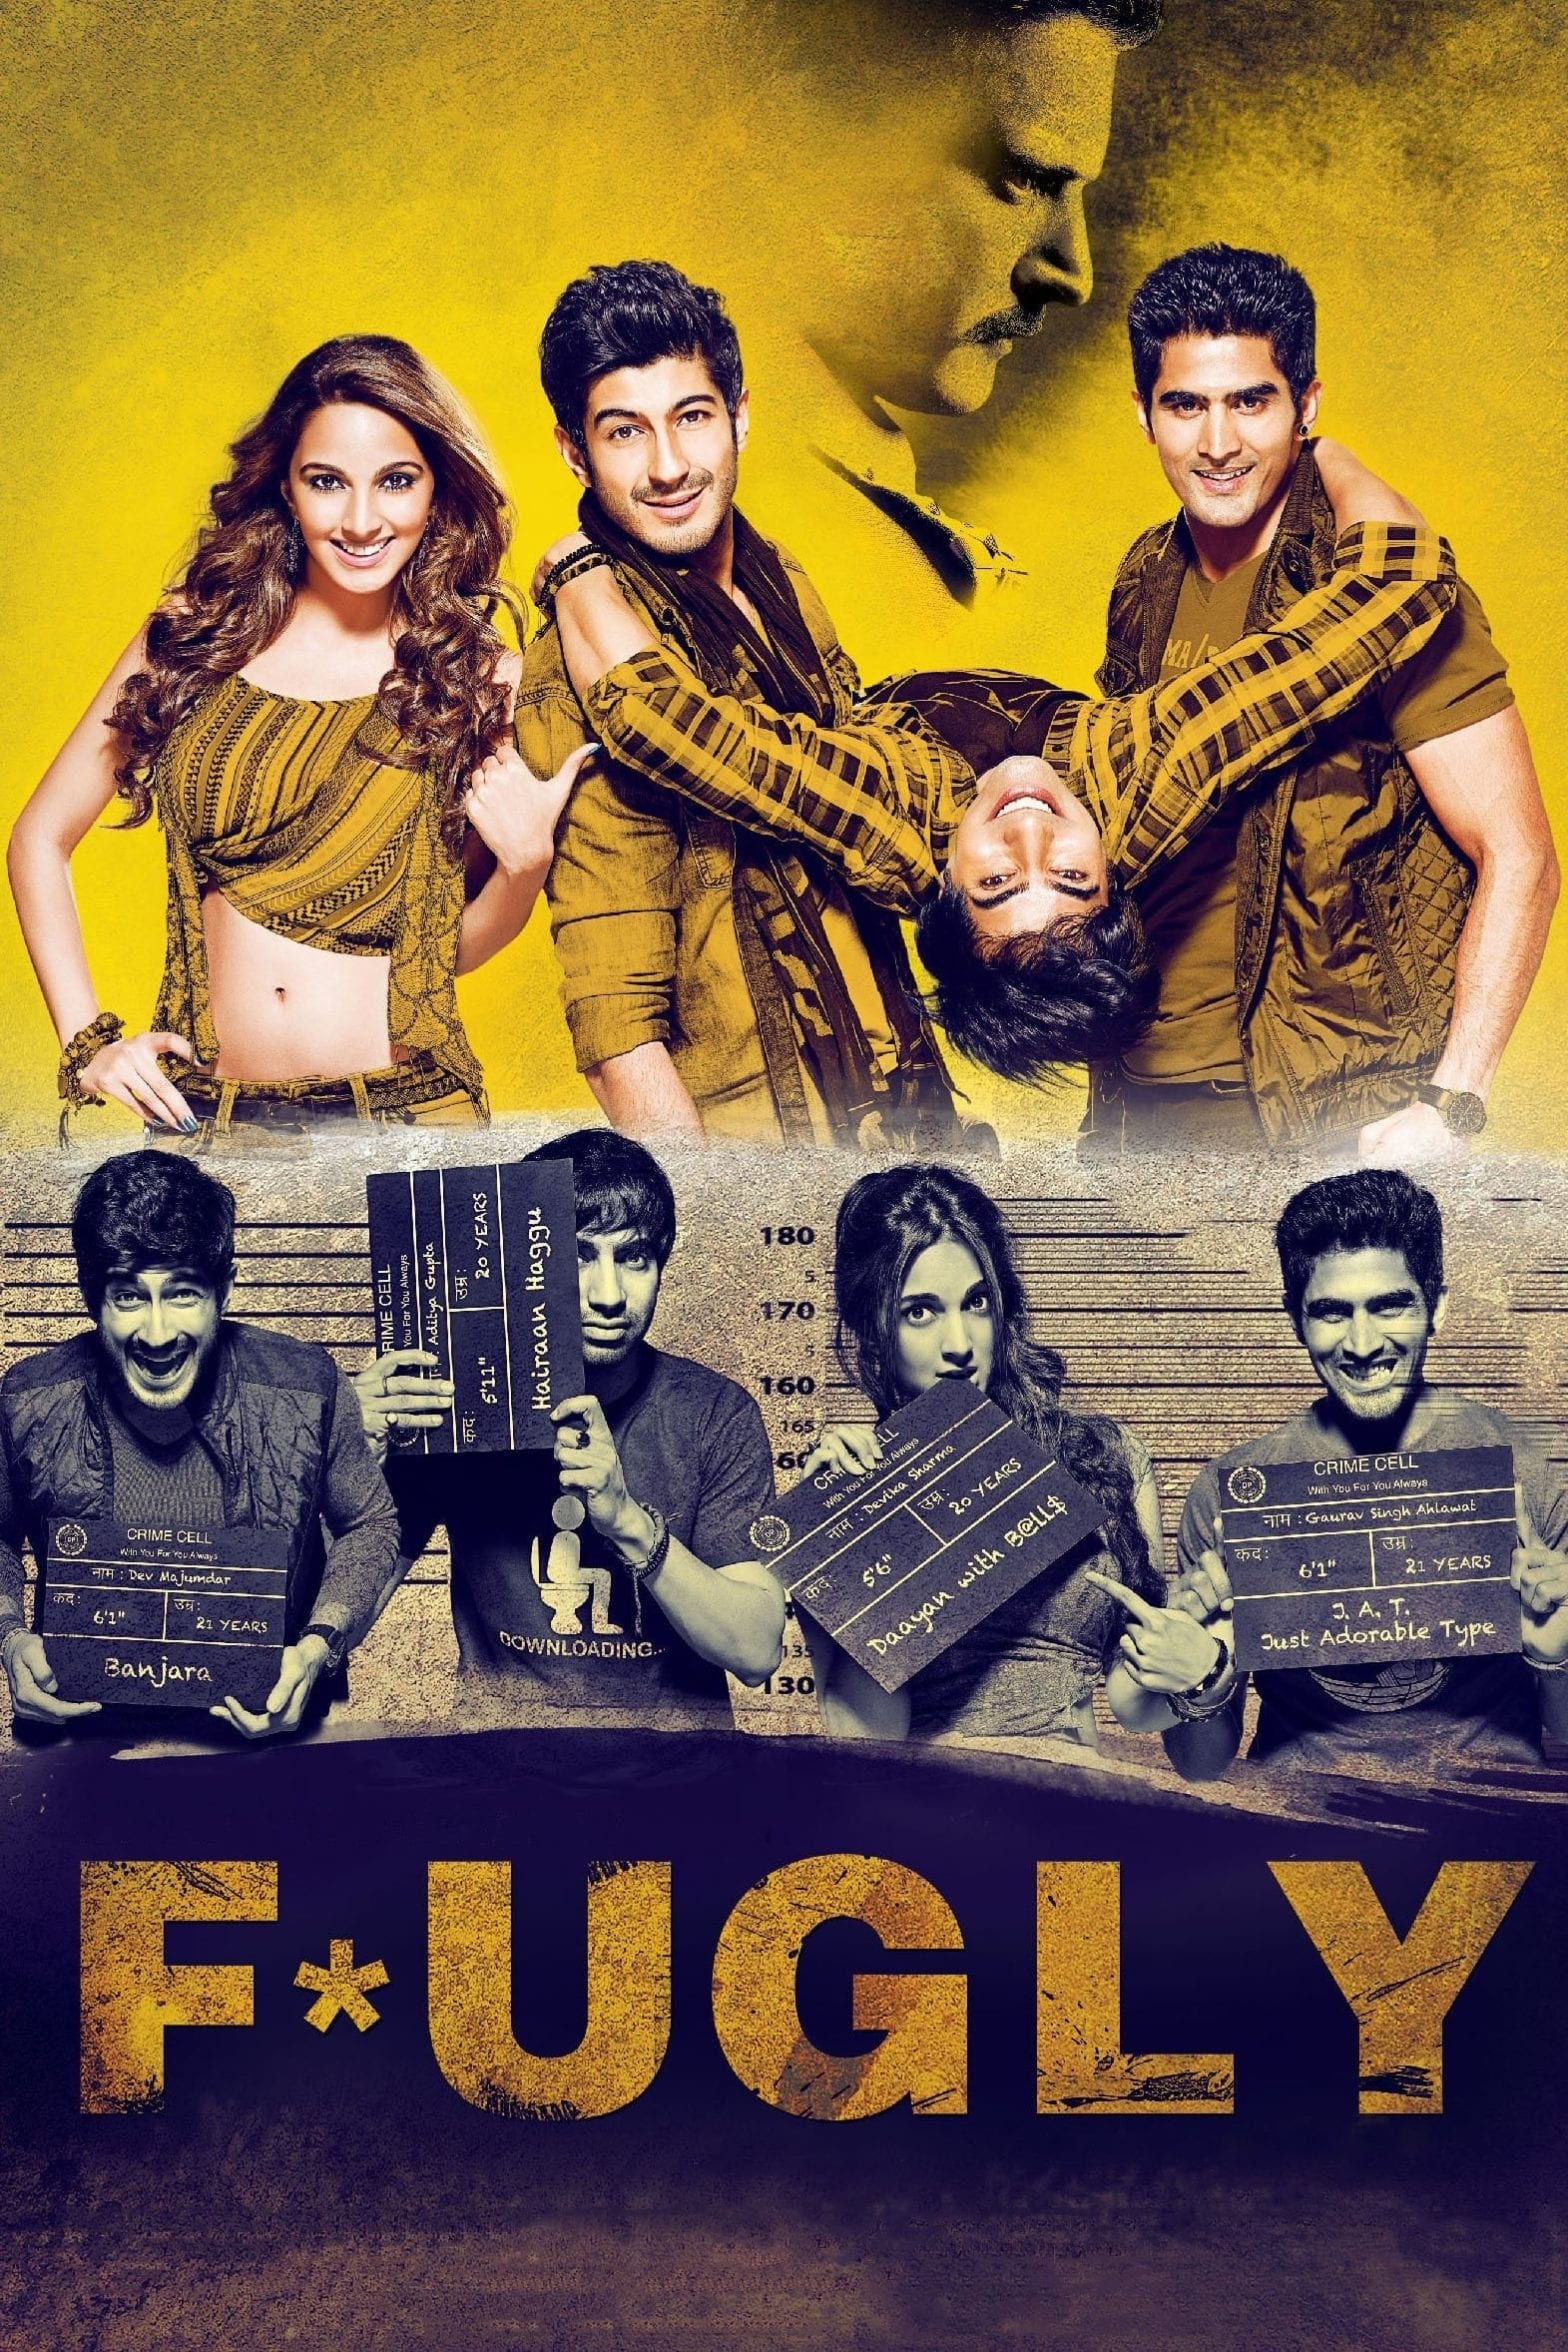 Poster for the movie "Fugly"